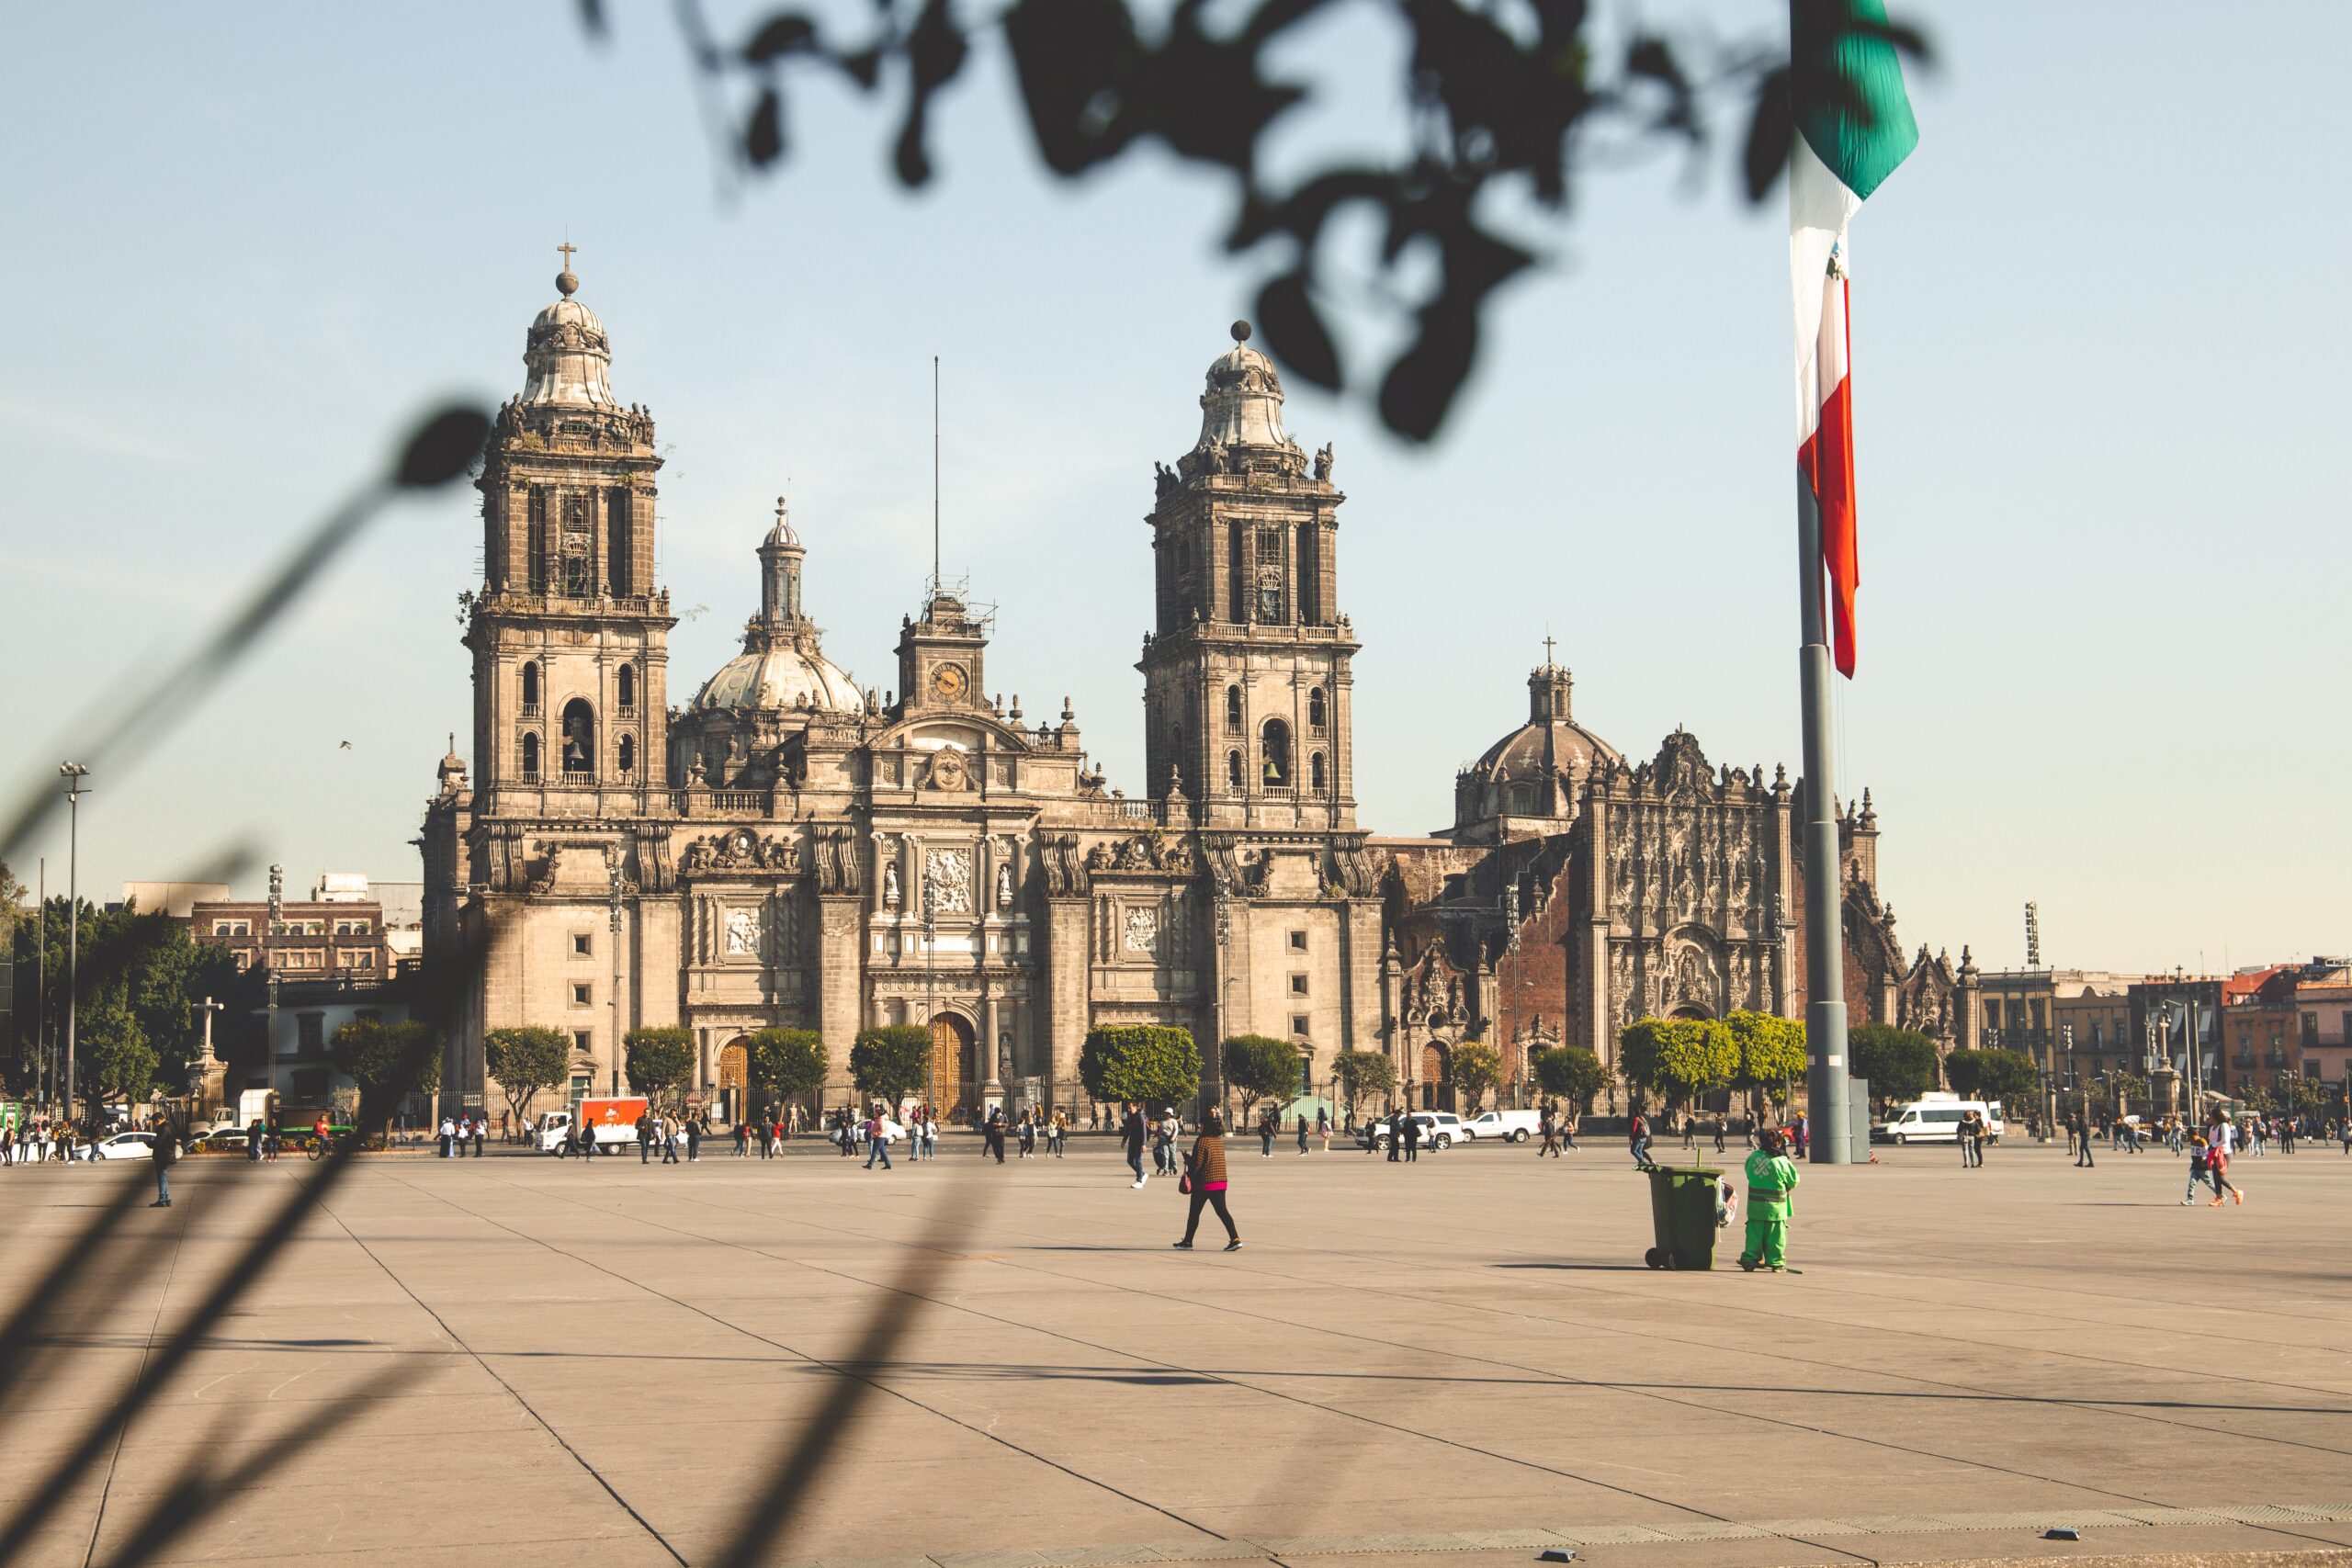 Read more about the best travel advisories to use when potentially traveling to areas that may not be fully safe. 
pictured: the bustling Mexico City with its national flag posted in front of a historical building